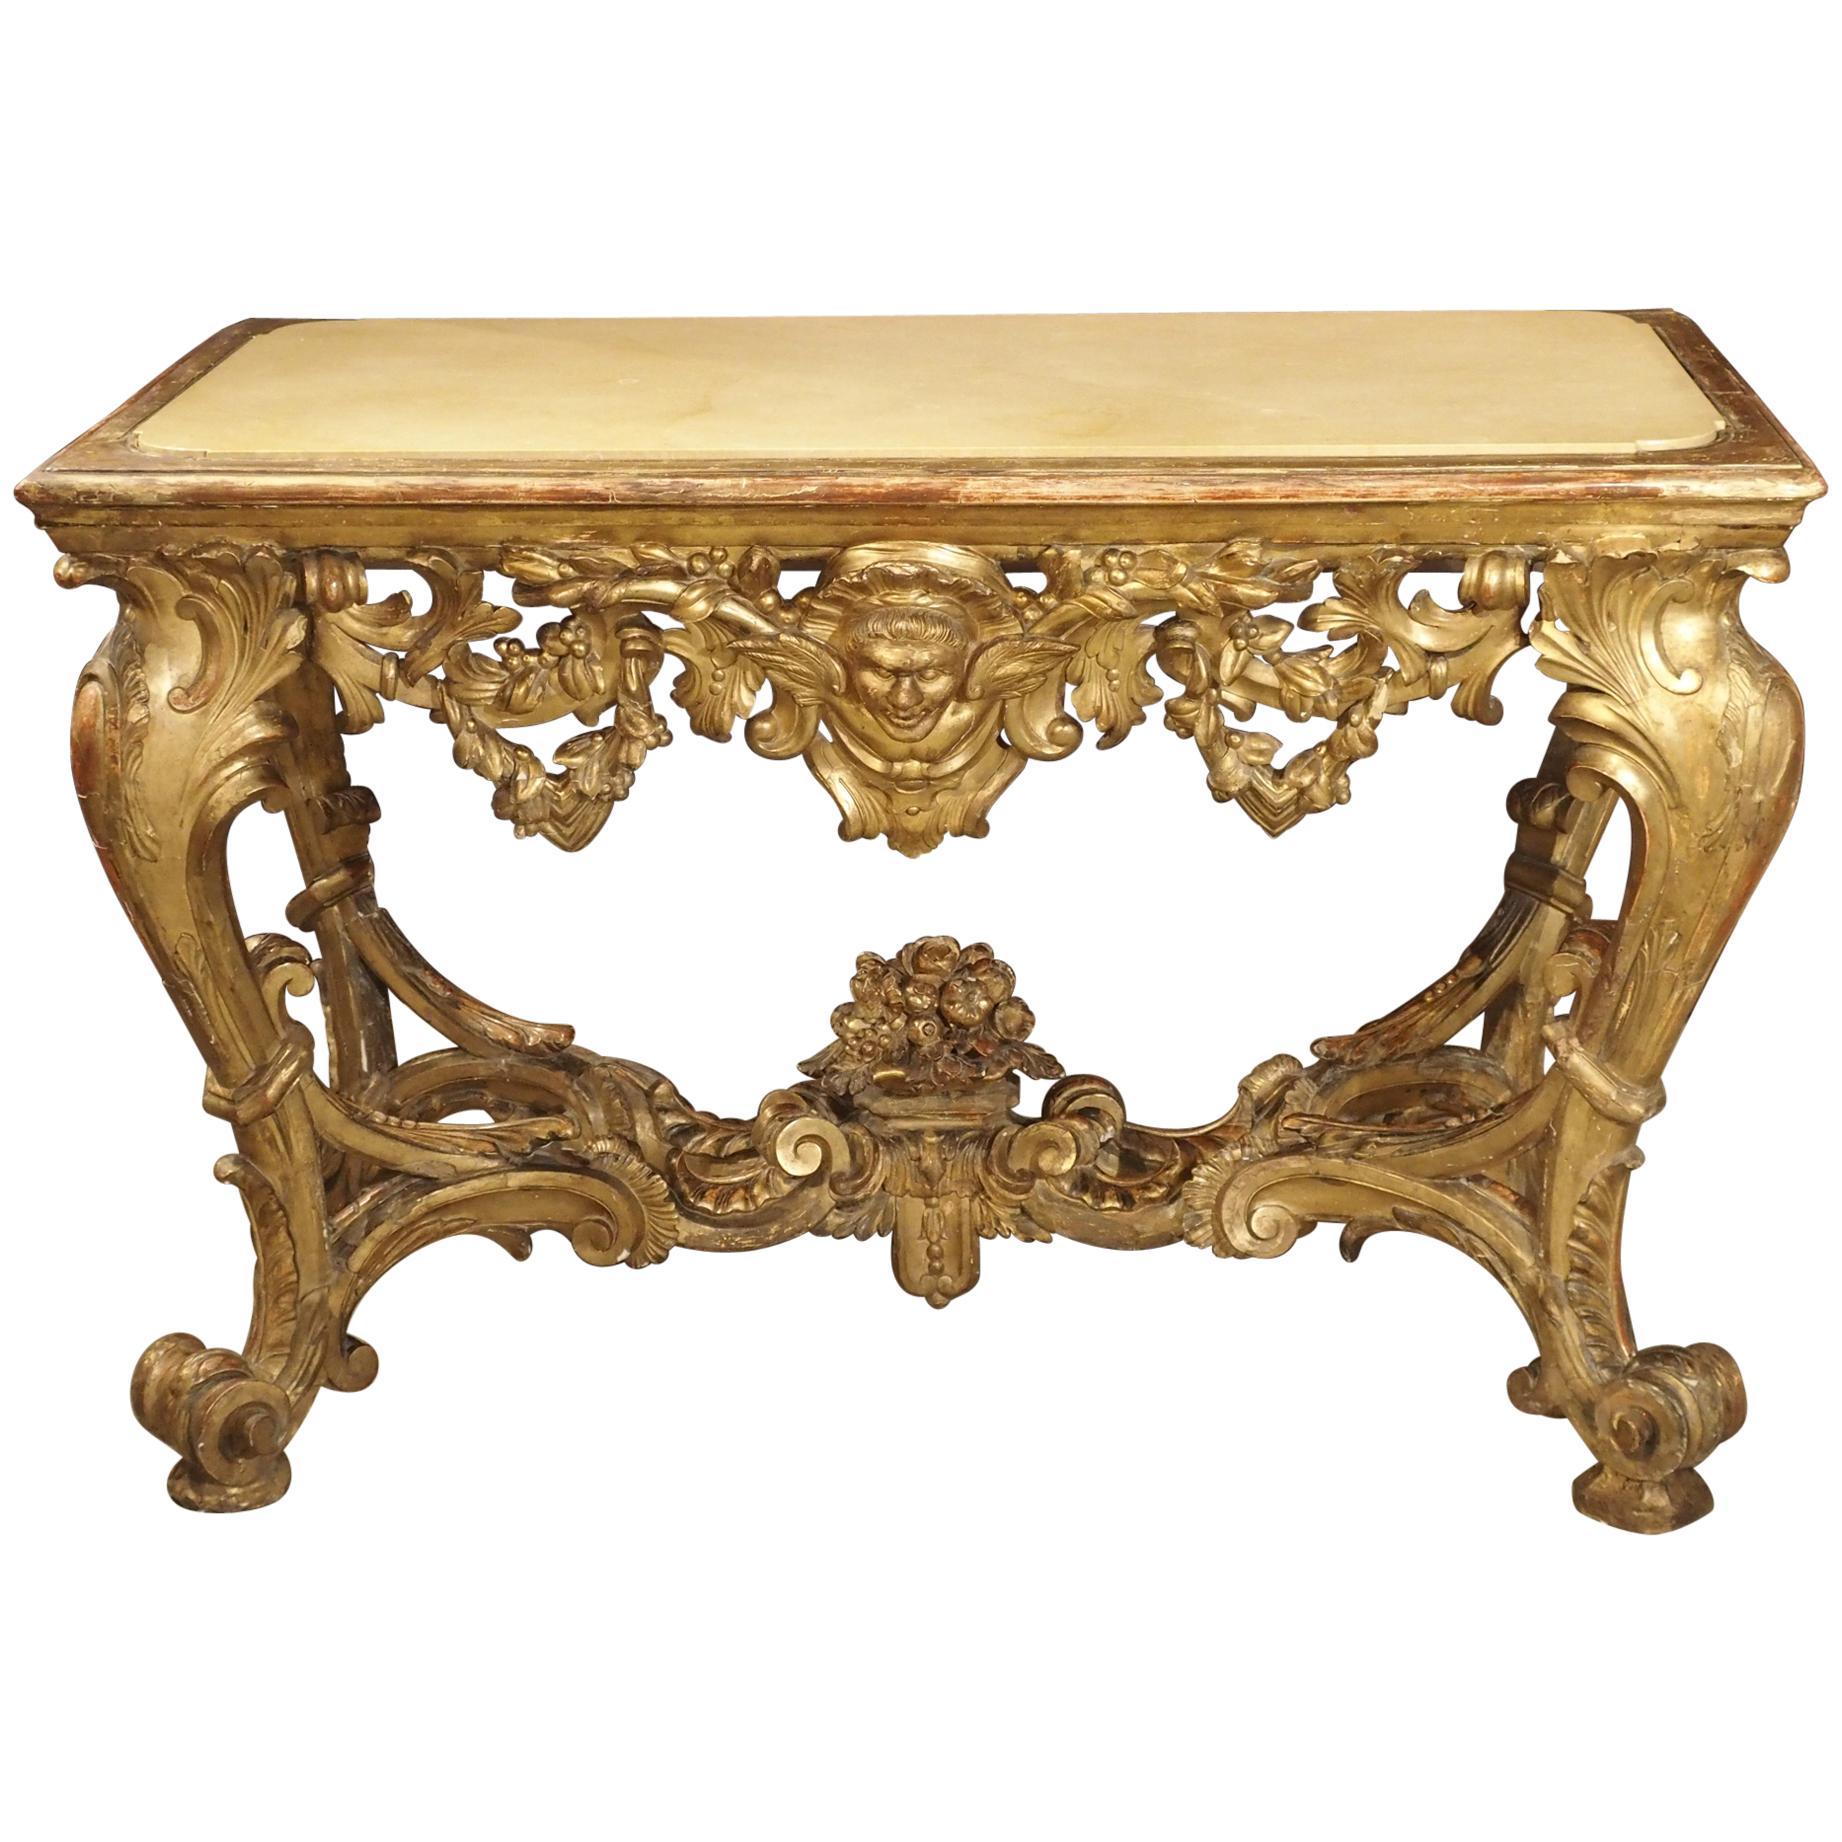 Late 17th Century Italian Giltwood Console Table with Inset Marble Top For Sale